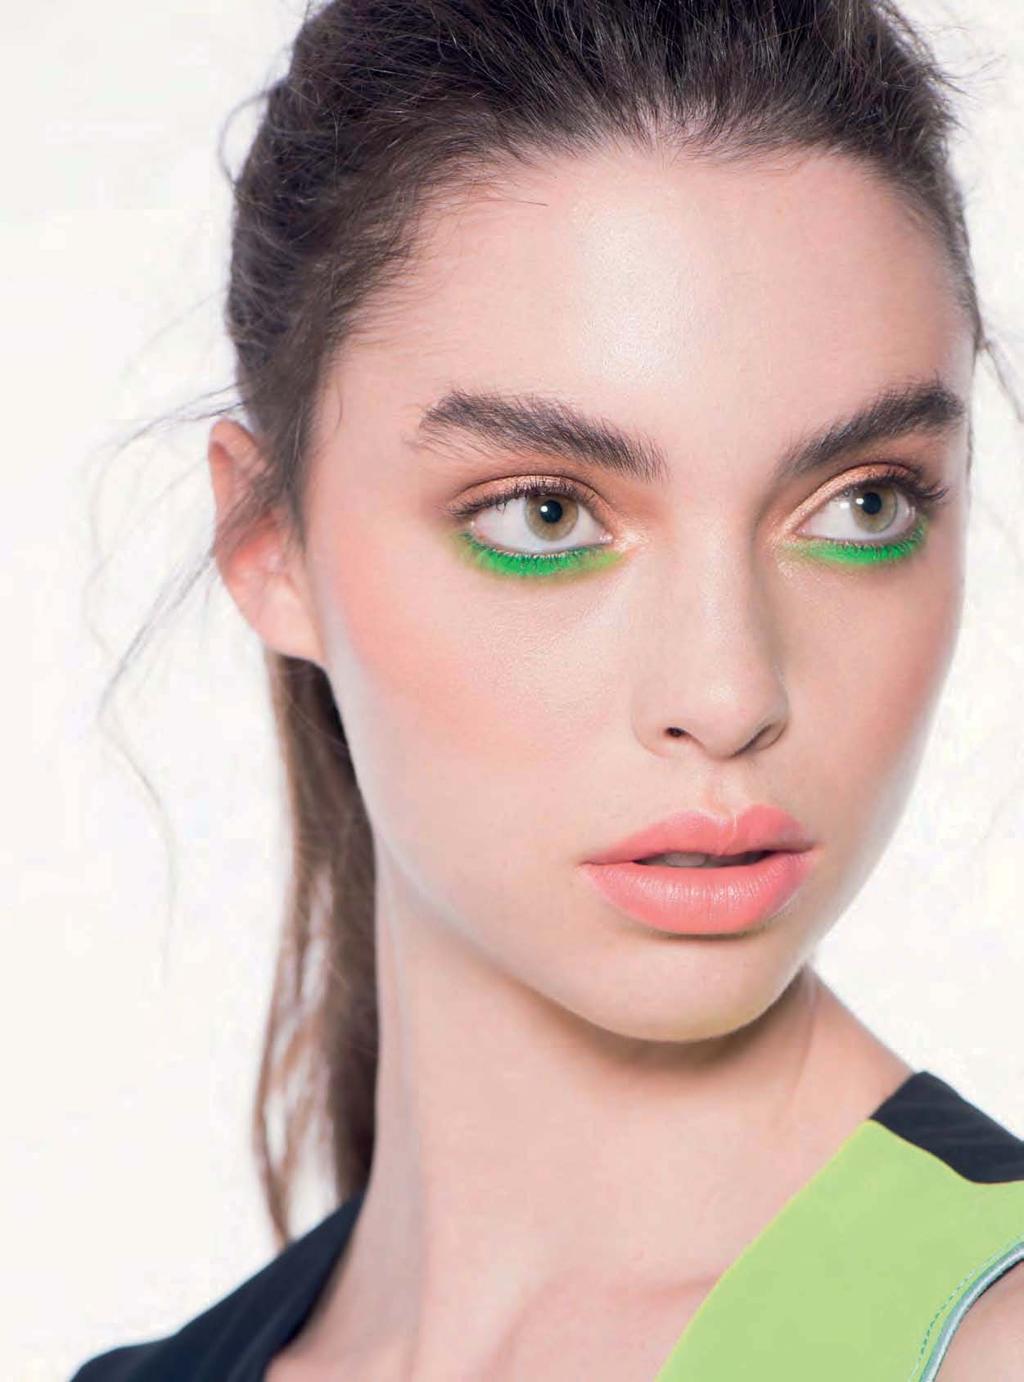 On the beauty front, if you are going for a summer festival look, a flash of neon across the lids, as seen backstage at Cividini and Wunderkind, or slick lines worn on the lower lids will definitely